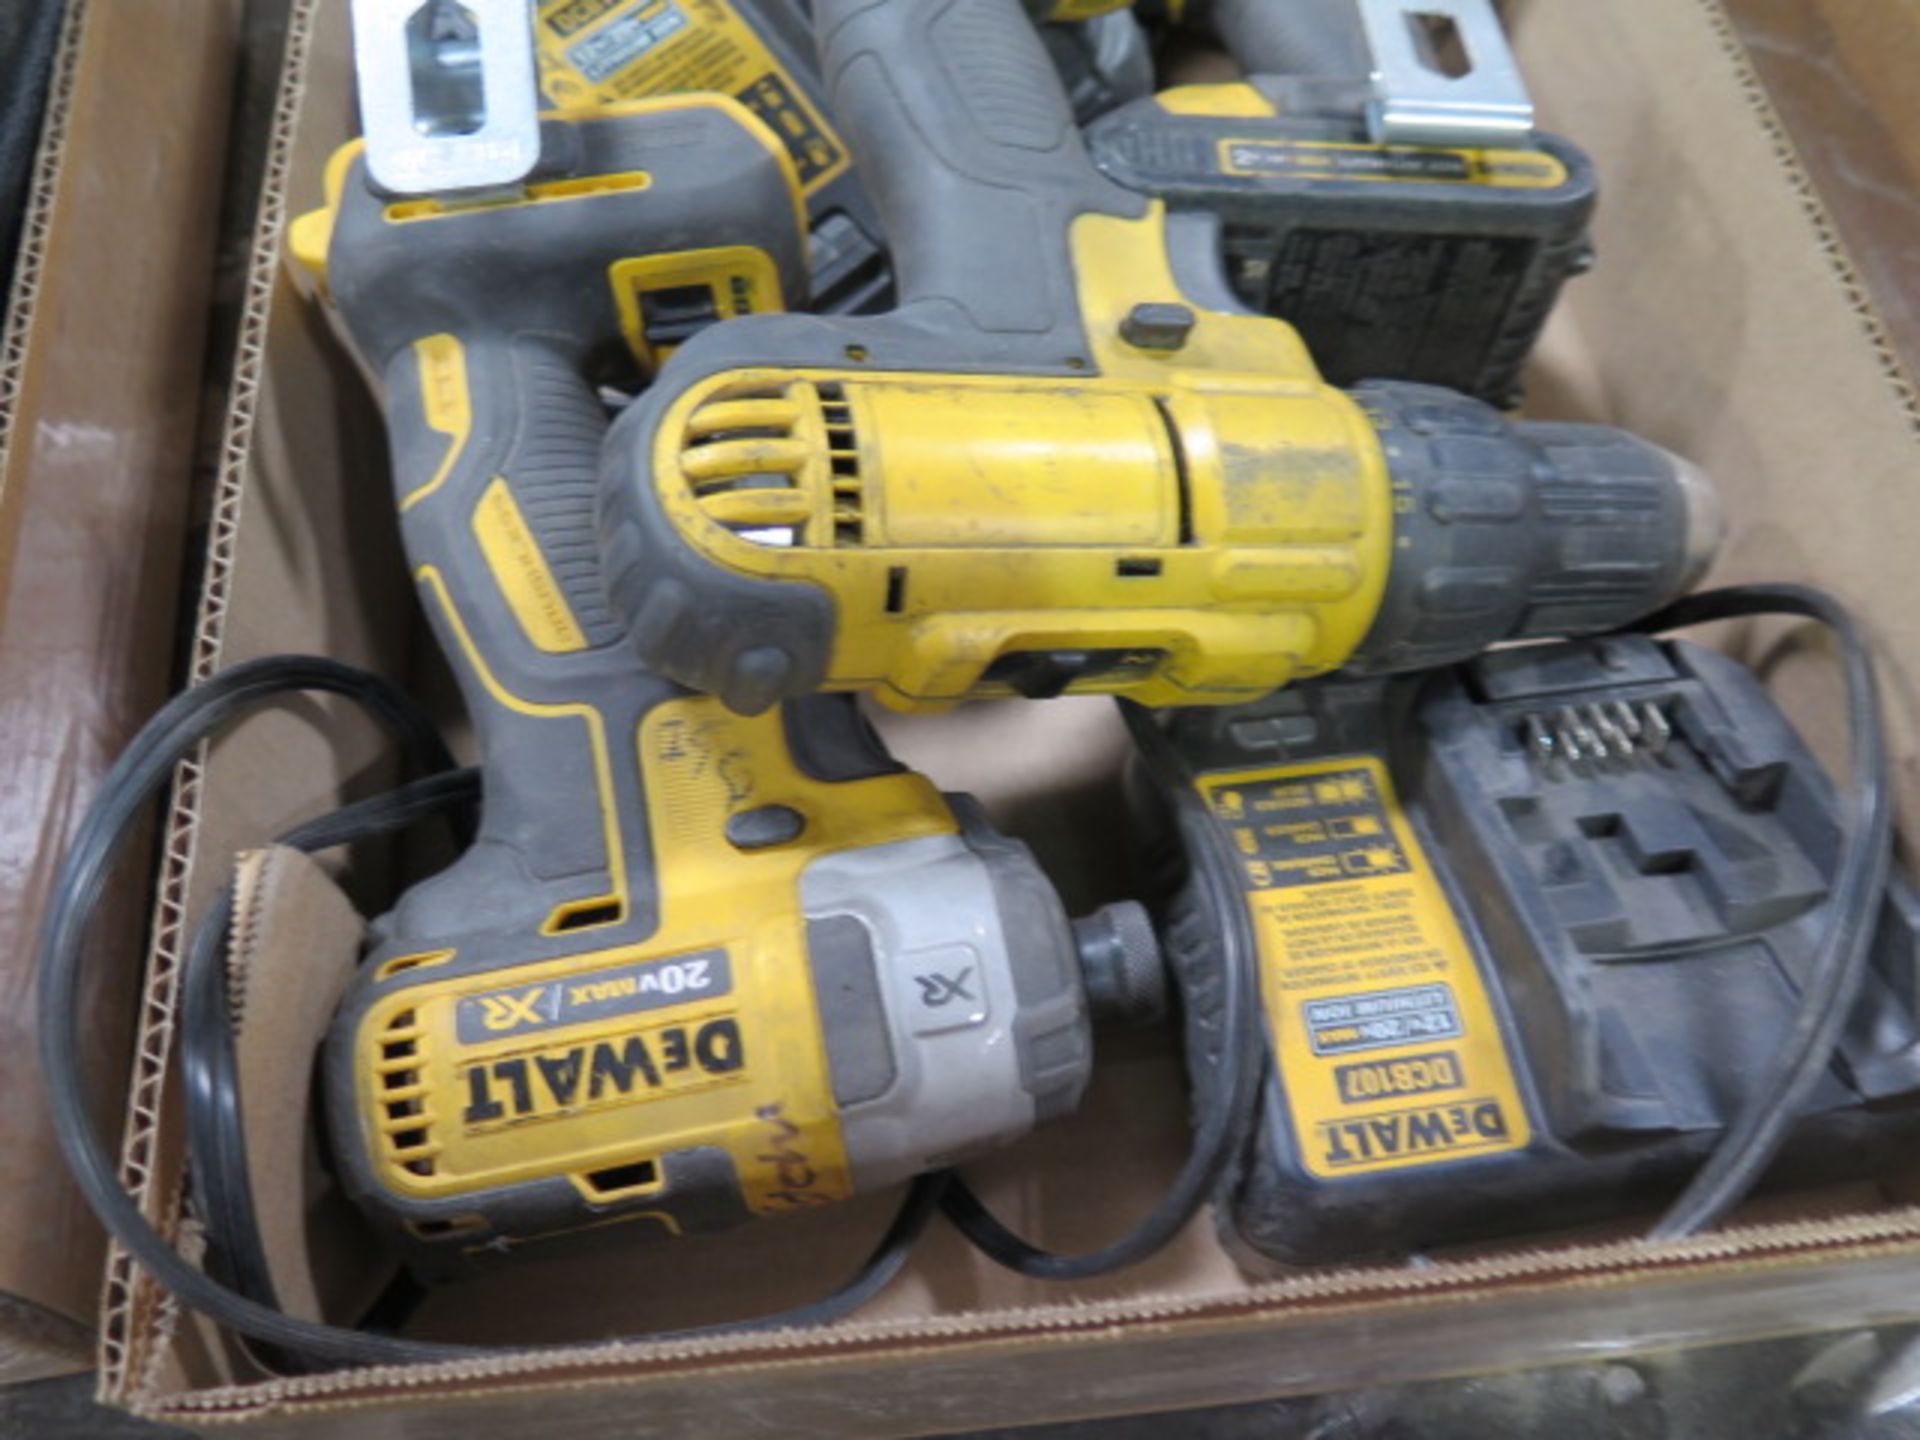 DeWalt 20 Volt Cordless Drills and Nut Drivers w/ Charger (SOLD AS-IS - NO WARRANTY) - Image 3 of 6